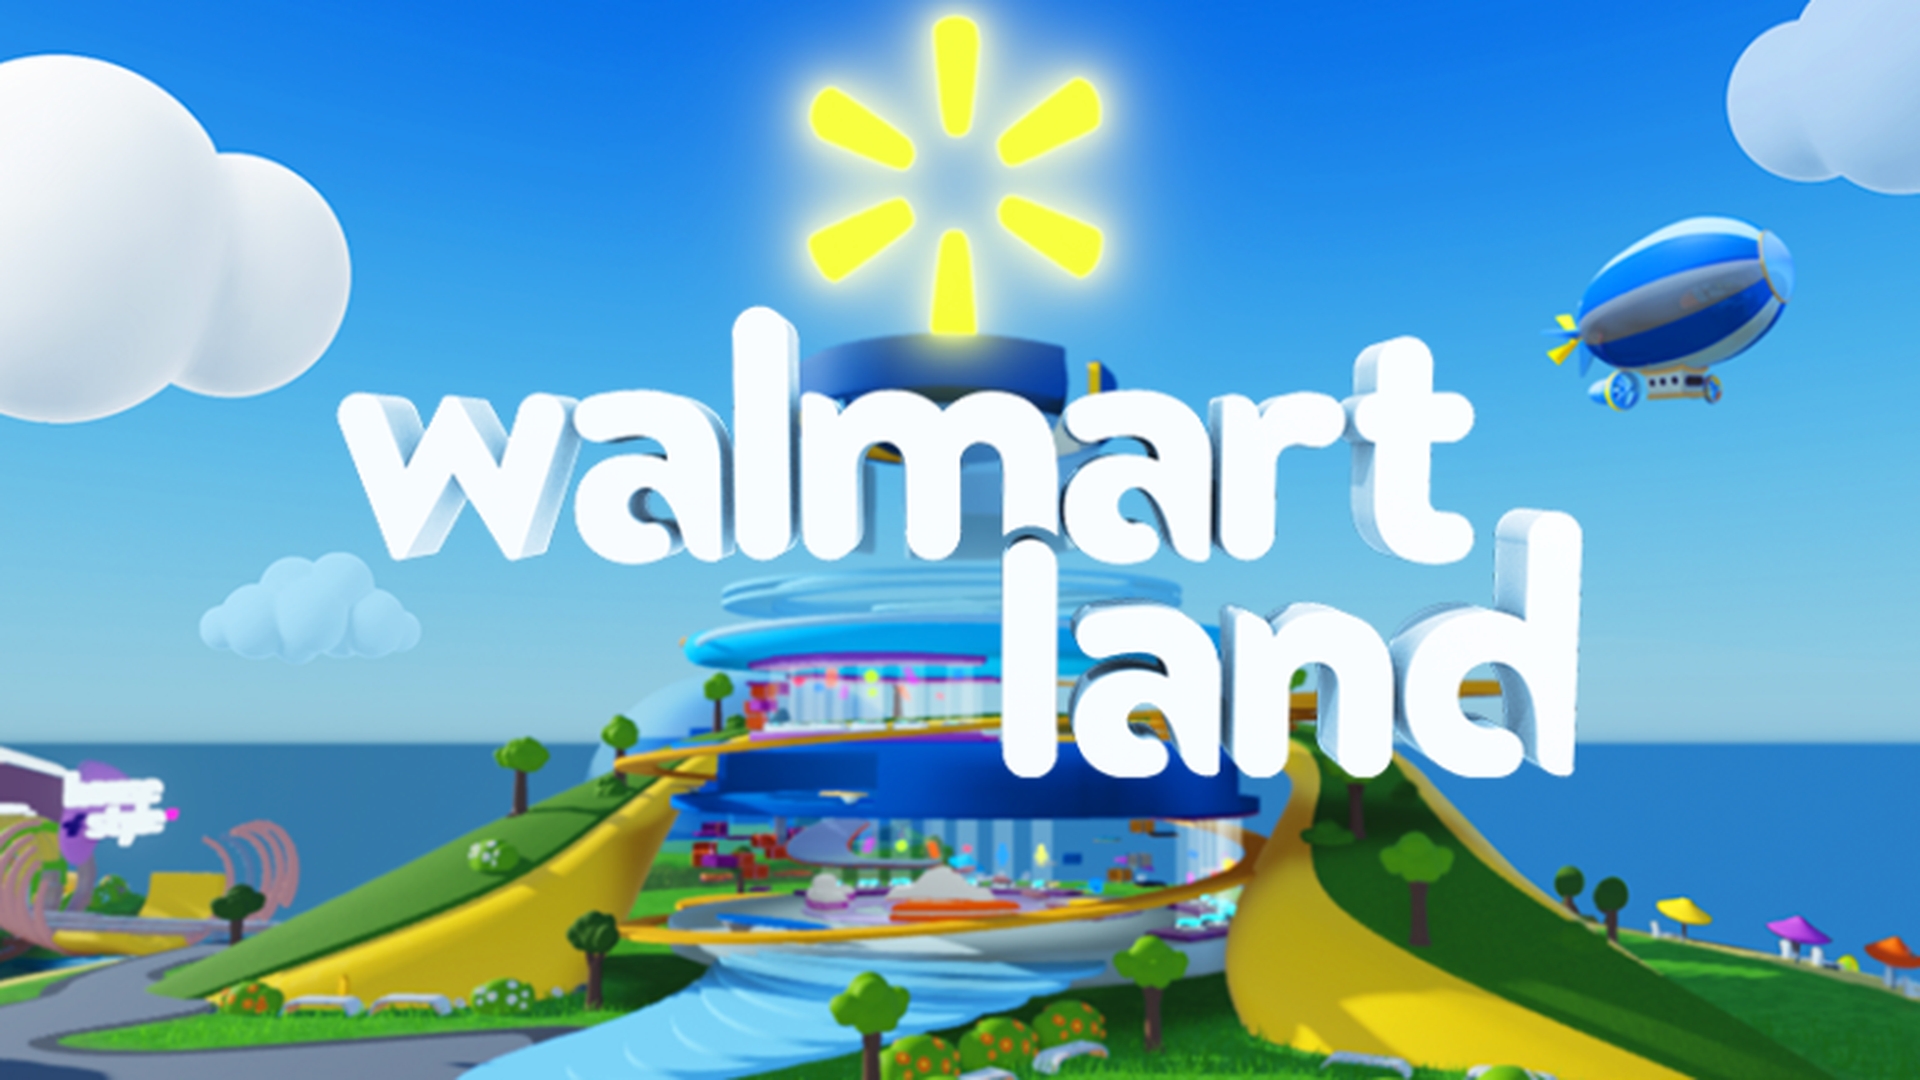 Walmart is now joining the virtual world via Roblox Metaverse and aims to target the teenage demographic of the US to drive up its sales.